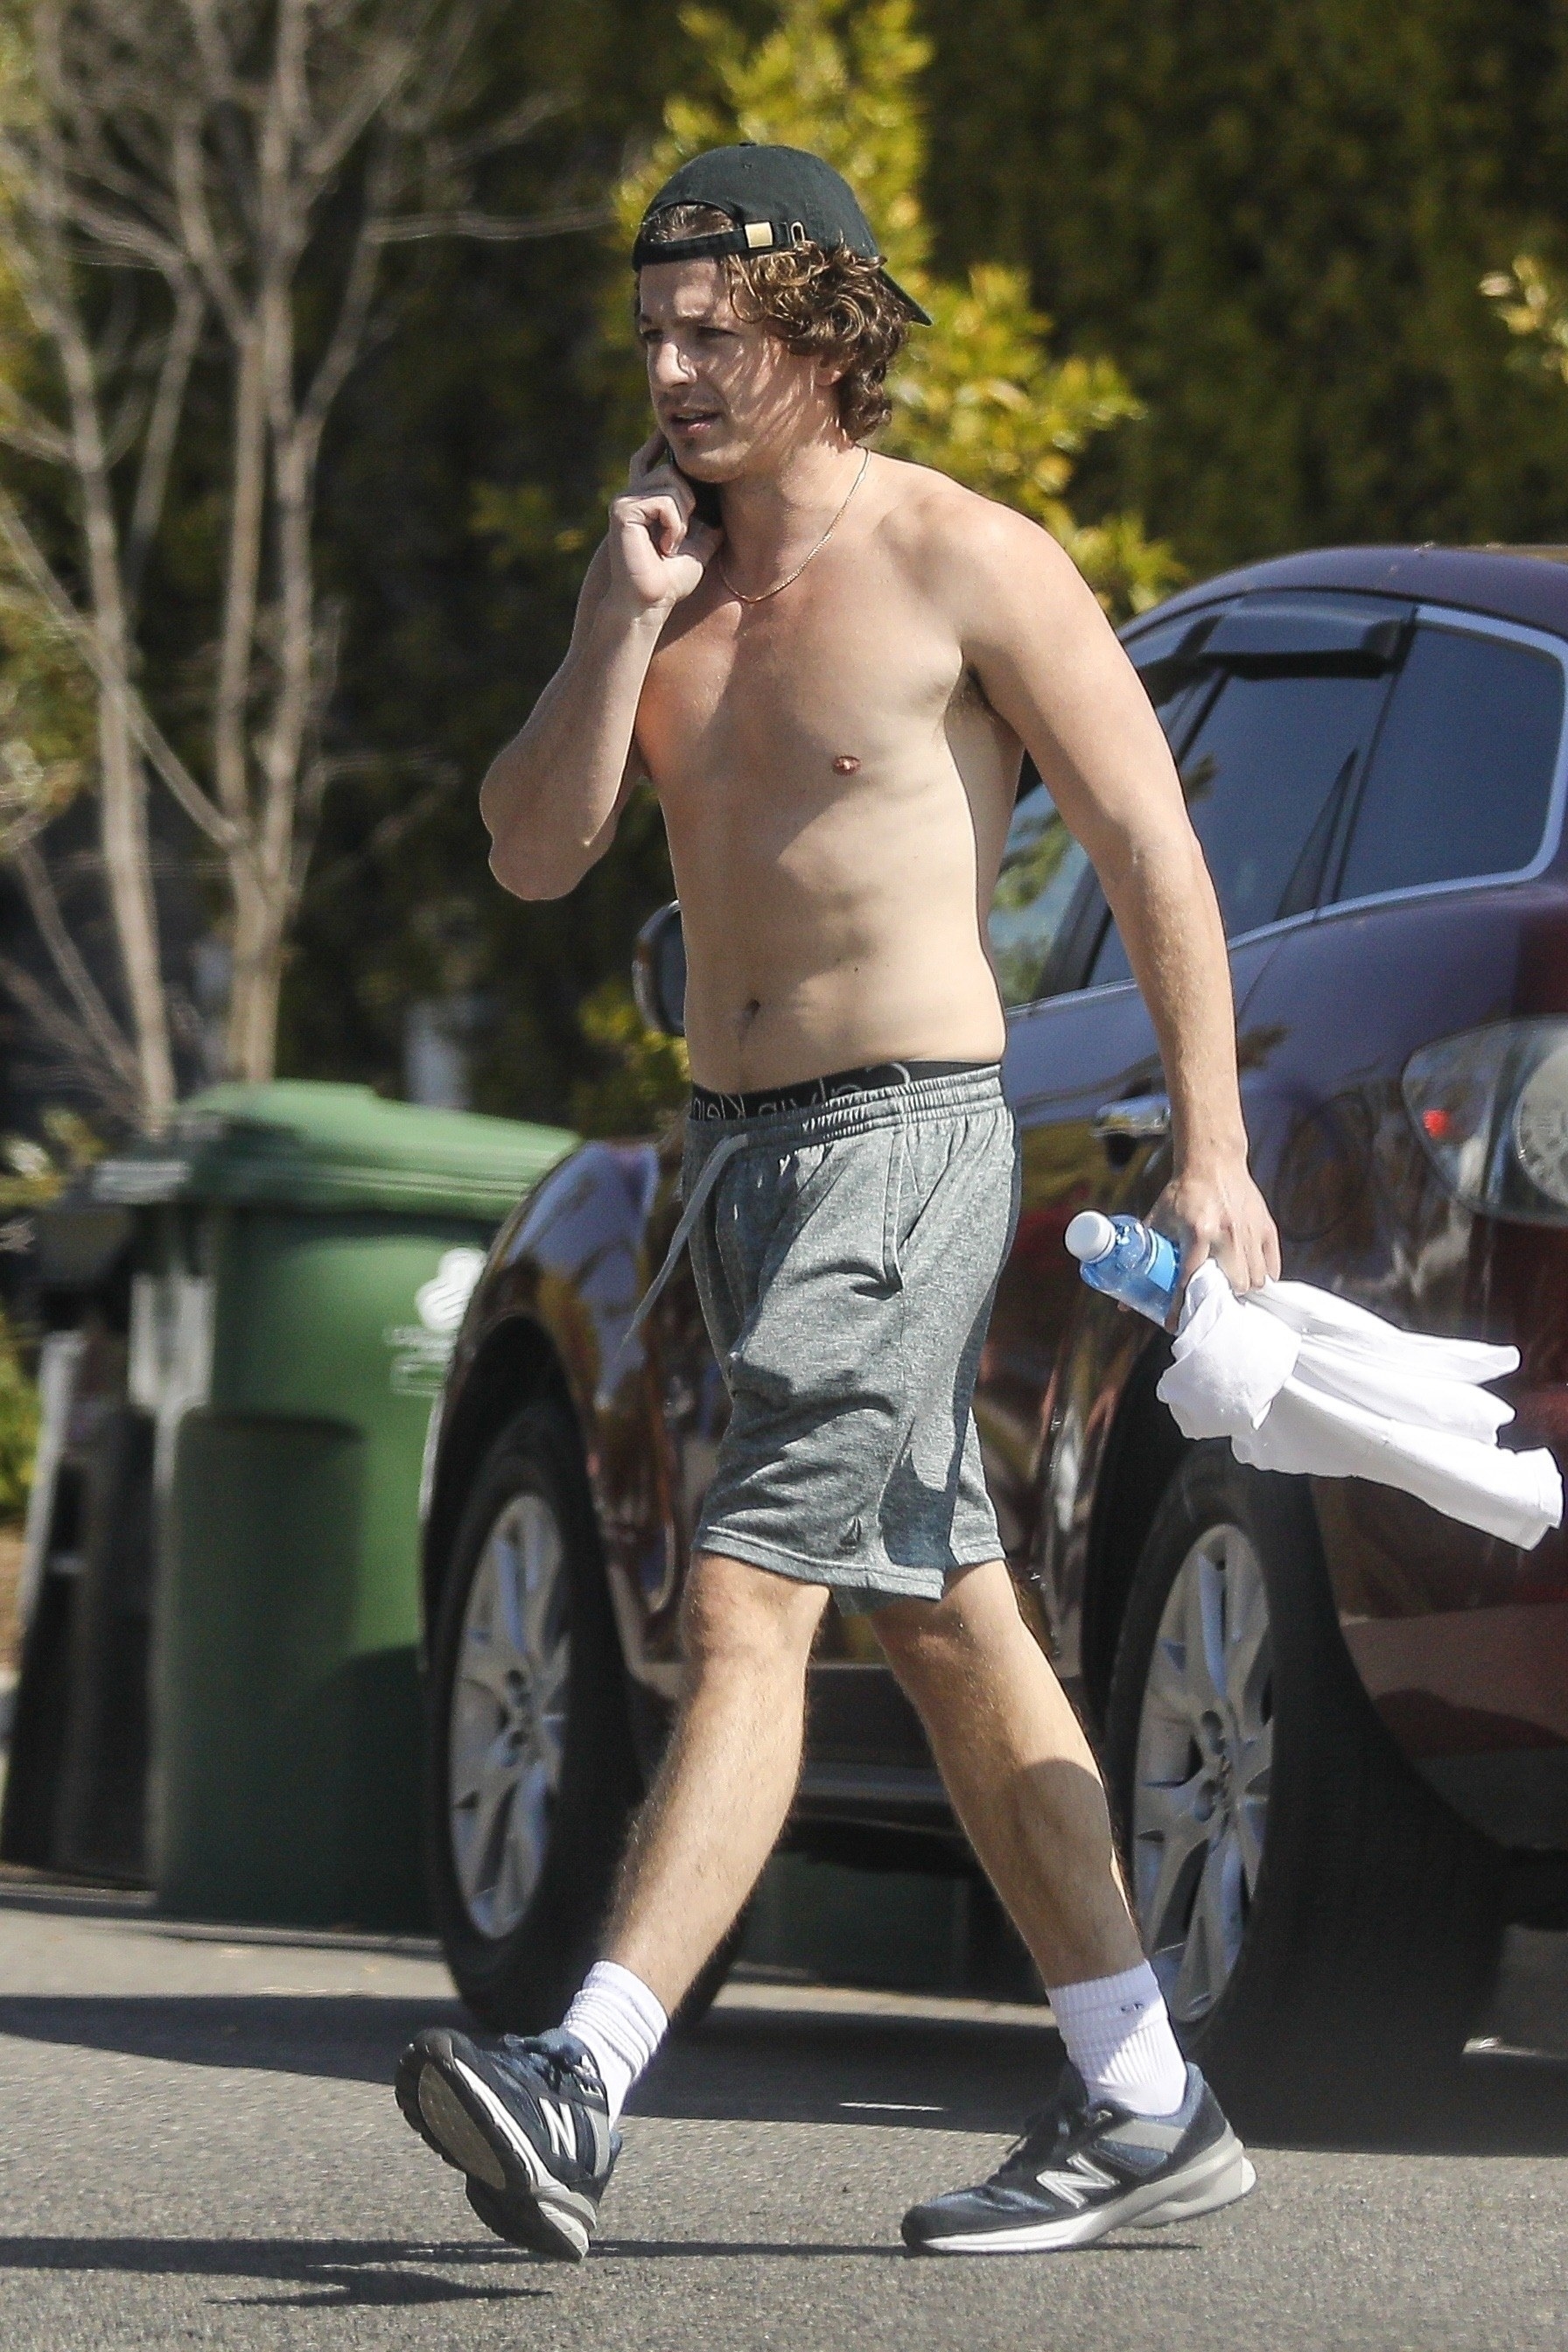 Charlie wearing shorts and sneakers holding a phone, t-shirt and a cellphone